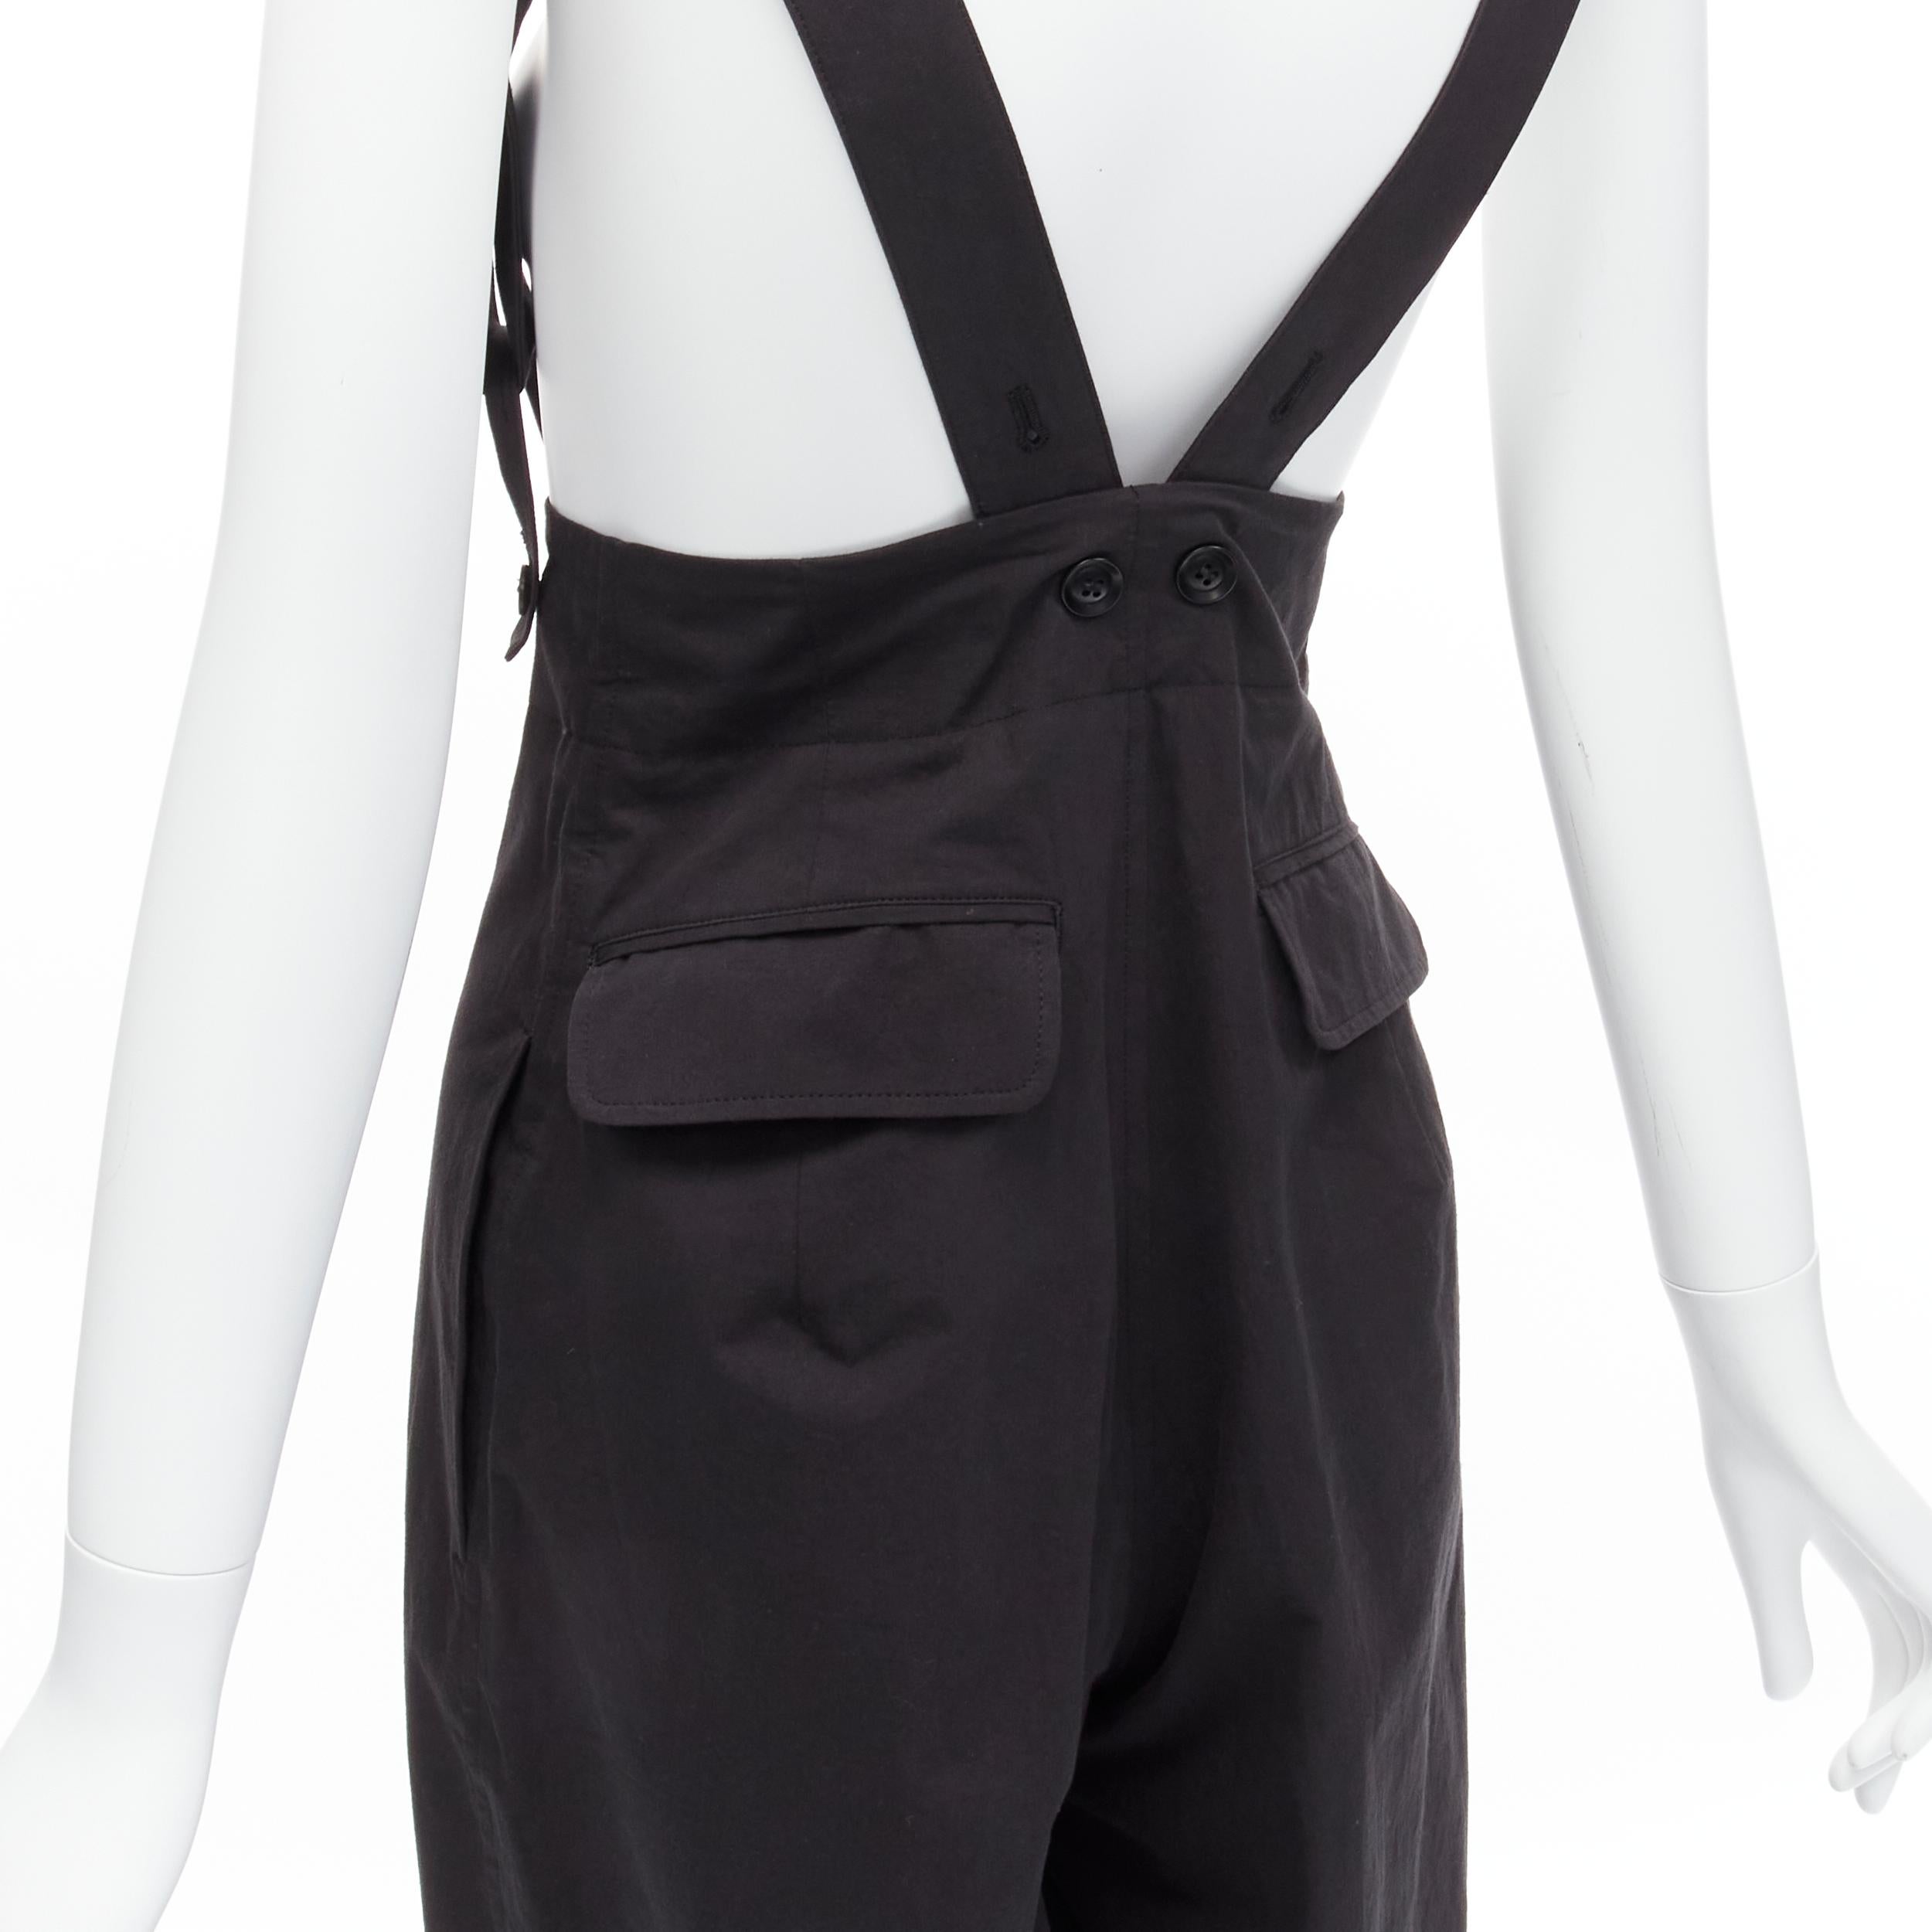 YOHJI YAMAMOTO Y'S black minimal beggar suspender dungaree wide leg pants JP1 S
Reference: TGAS/D00225
Brand: Yohji Yamamoto
Collection: Y'S
Material: Cotton
Color: Black
Pattern: Solid
Closure: Zip Fly
Extra Details: Adjustable straps.
Made in: